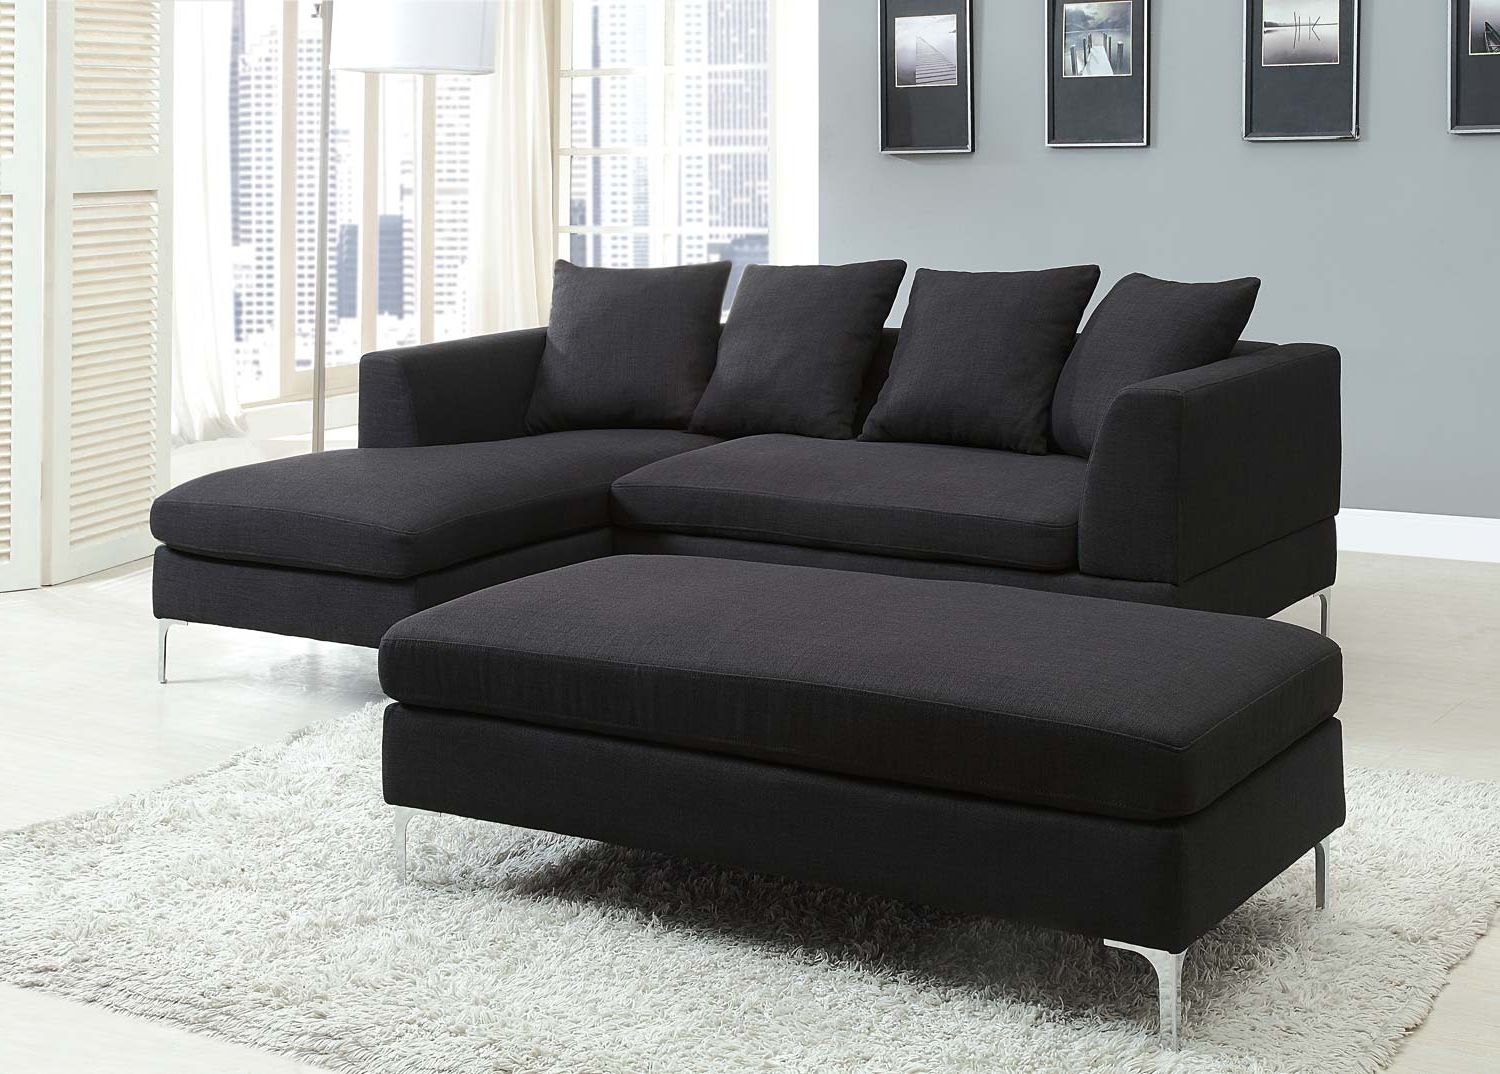 Black Sectional Couch Cheap — Radionigerialagos Inside Well Known Cheap Black Sofas (View 1 of 15)